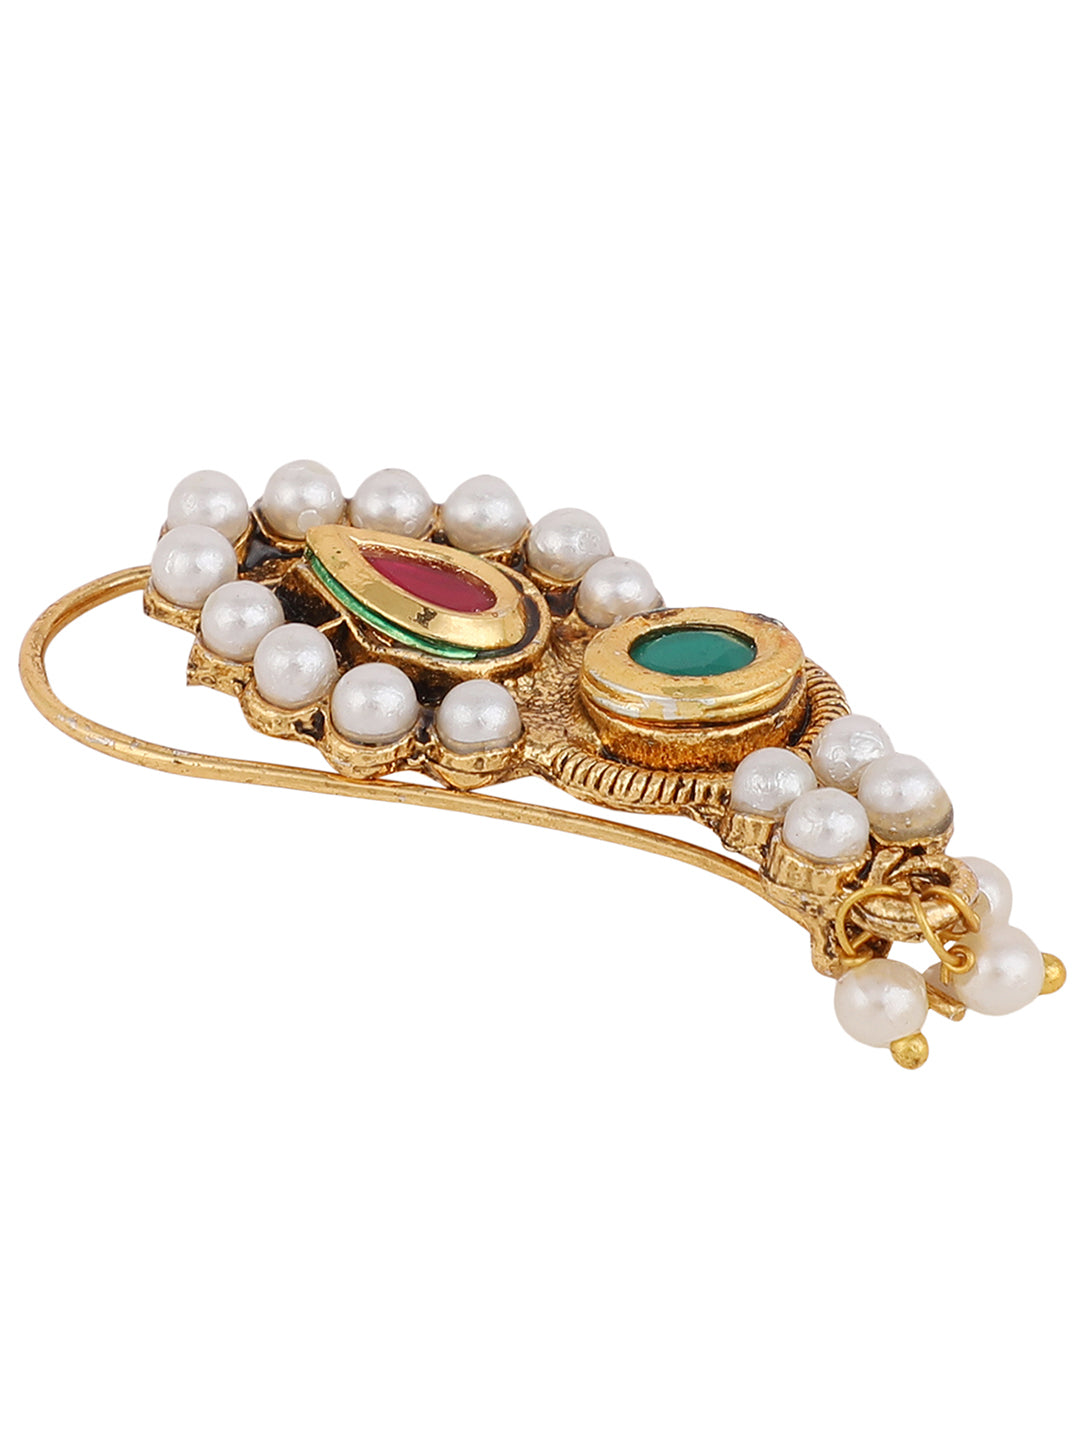 Pearl Maharashtrian Nath Nose Pin For Women By Anikas Creation